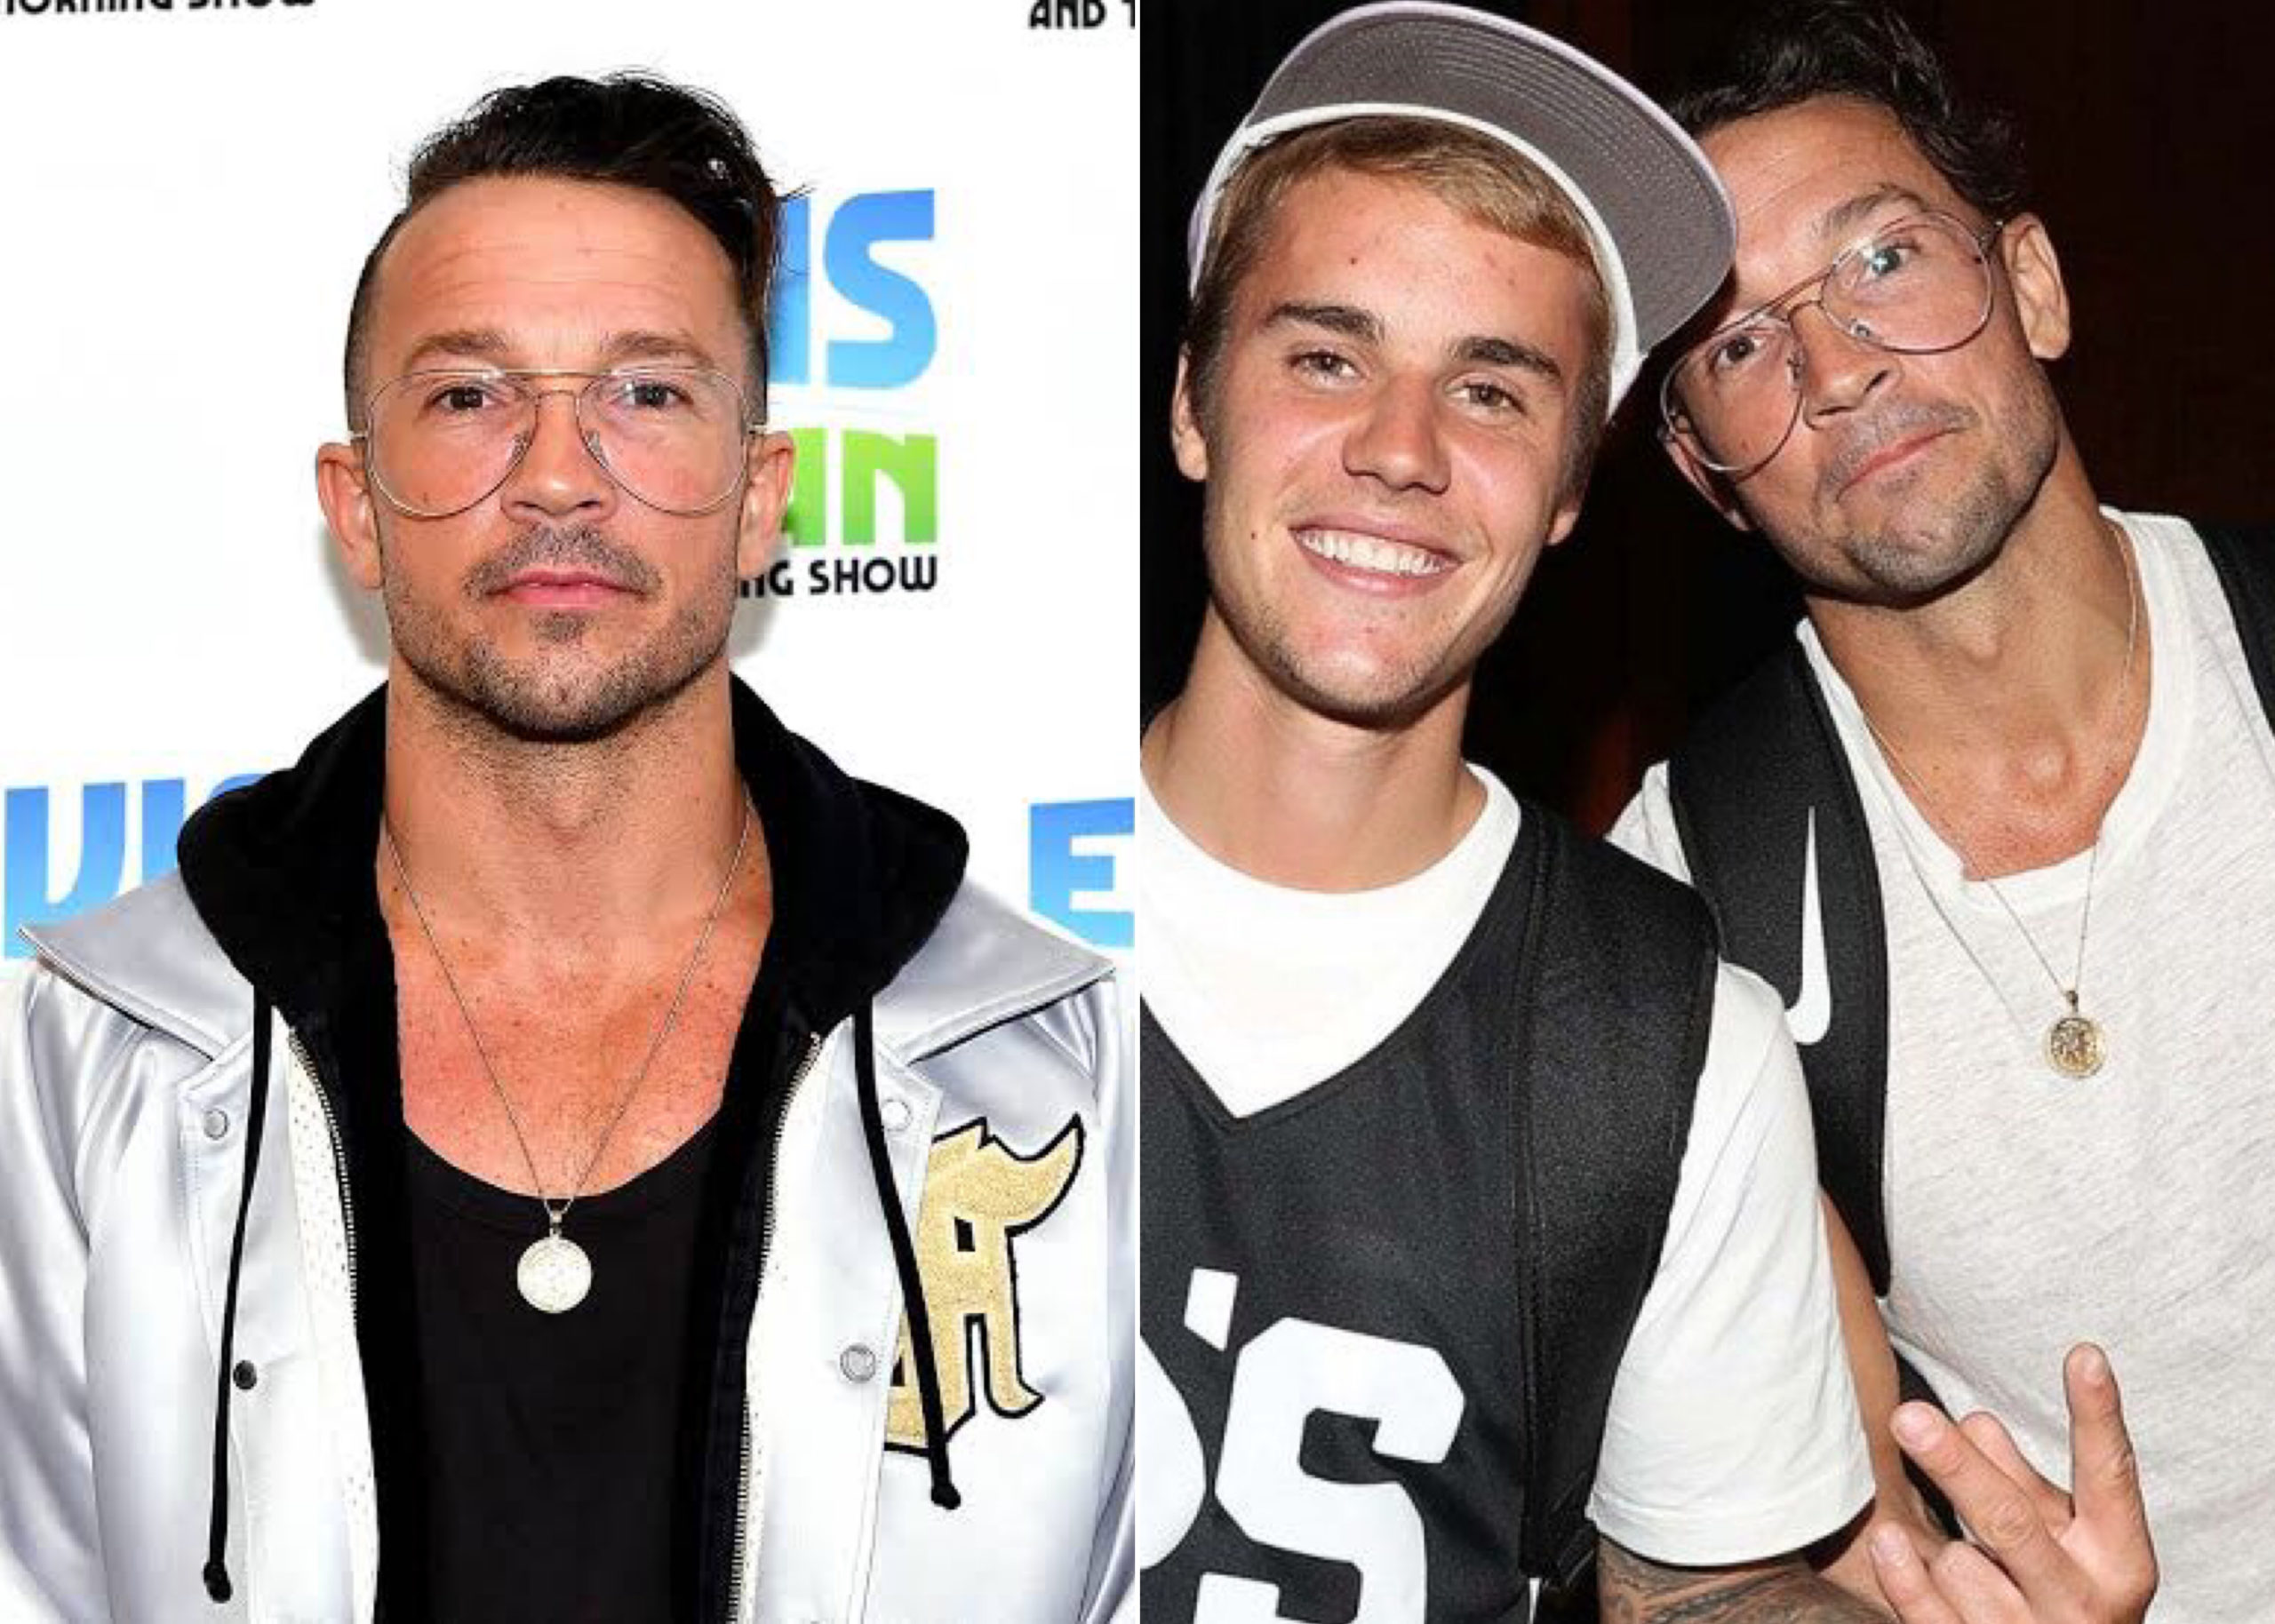 Carl Lentz, Hillsong Pastor And Justin Bieber’s One-Time Spiritual Adviser, Fired Over 'Moral Failures'